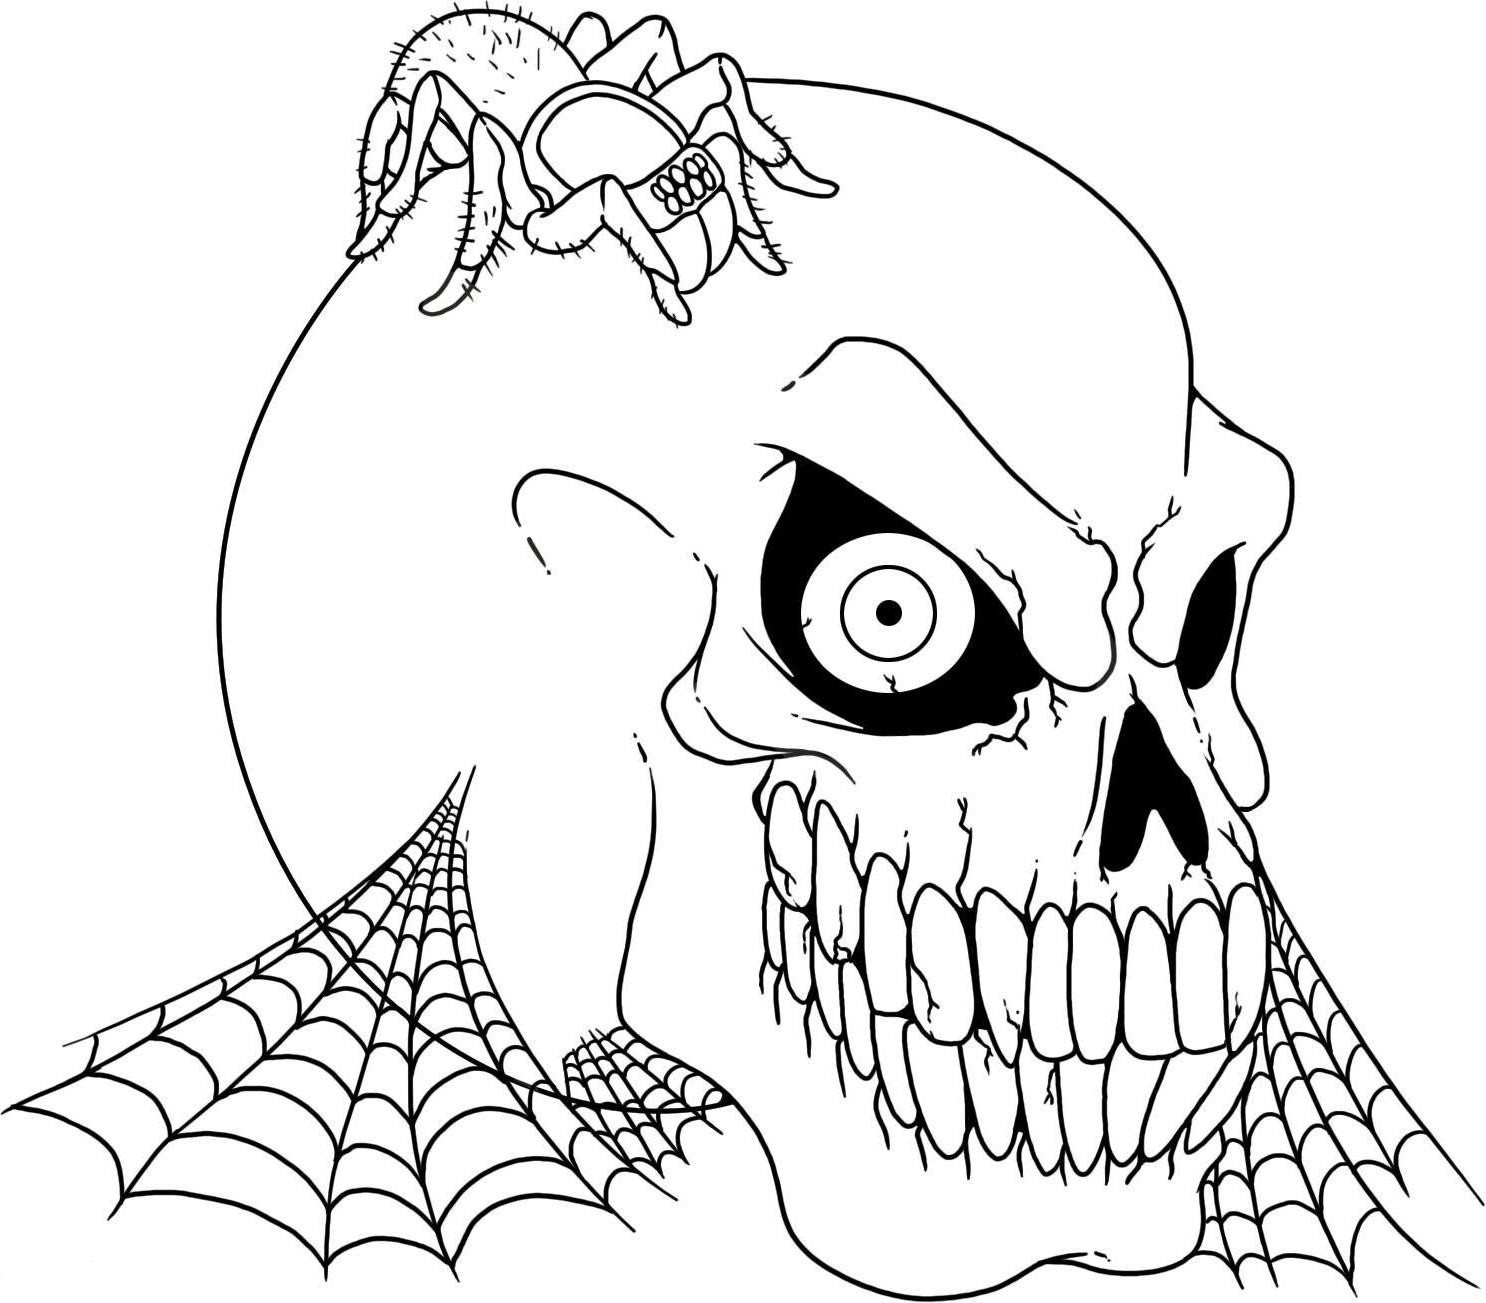 Coloring Pages For Teens Creapy
 Scary Halloween Coloring Pages For Teens Coloring Home